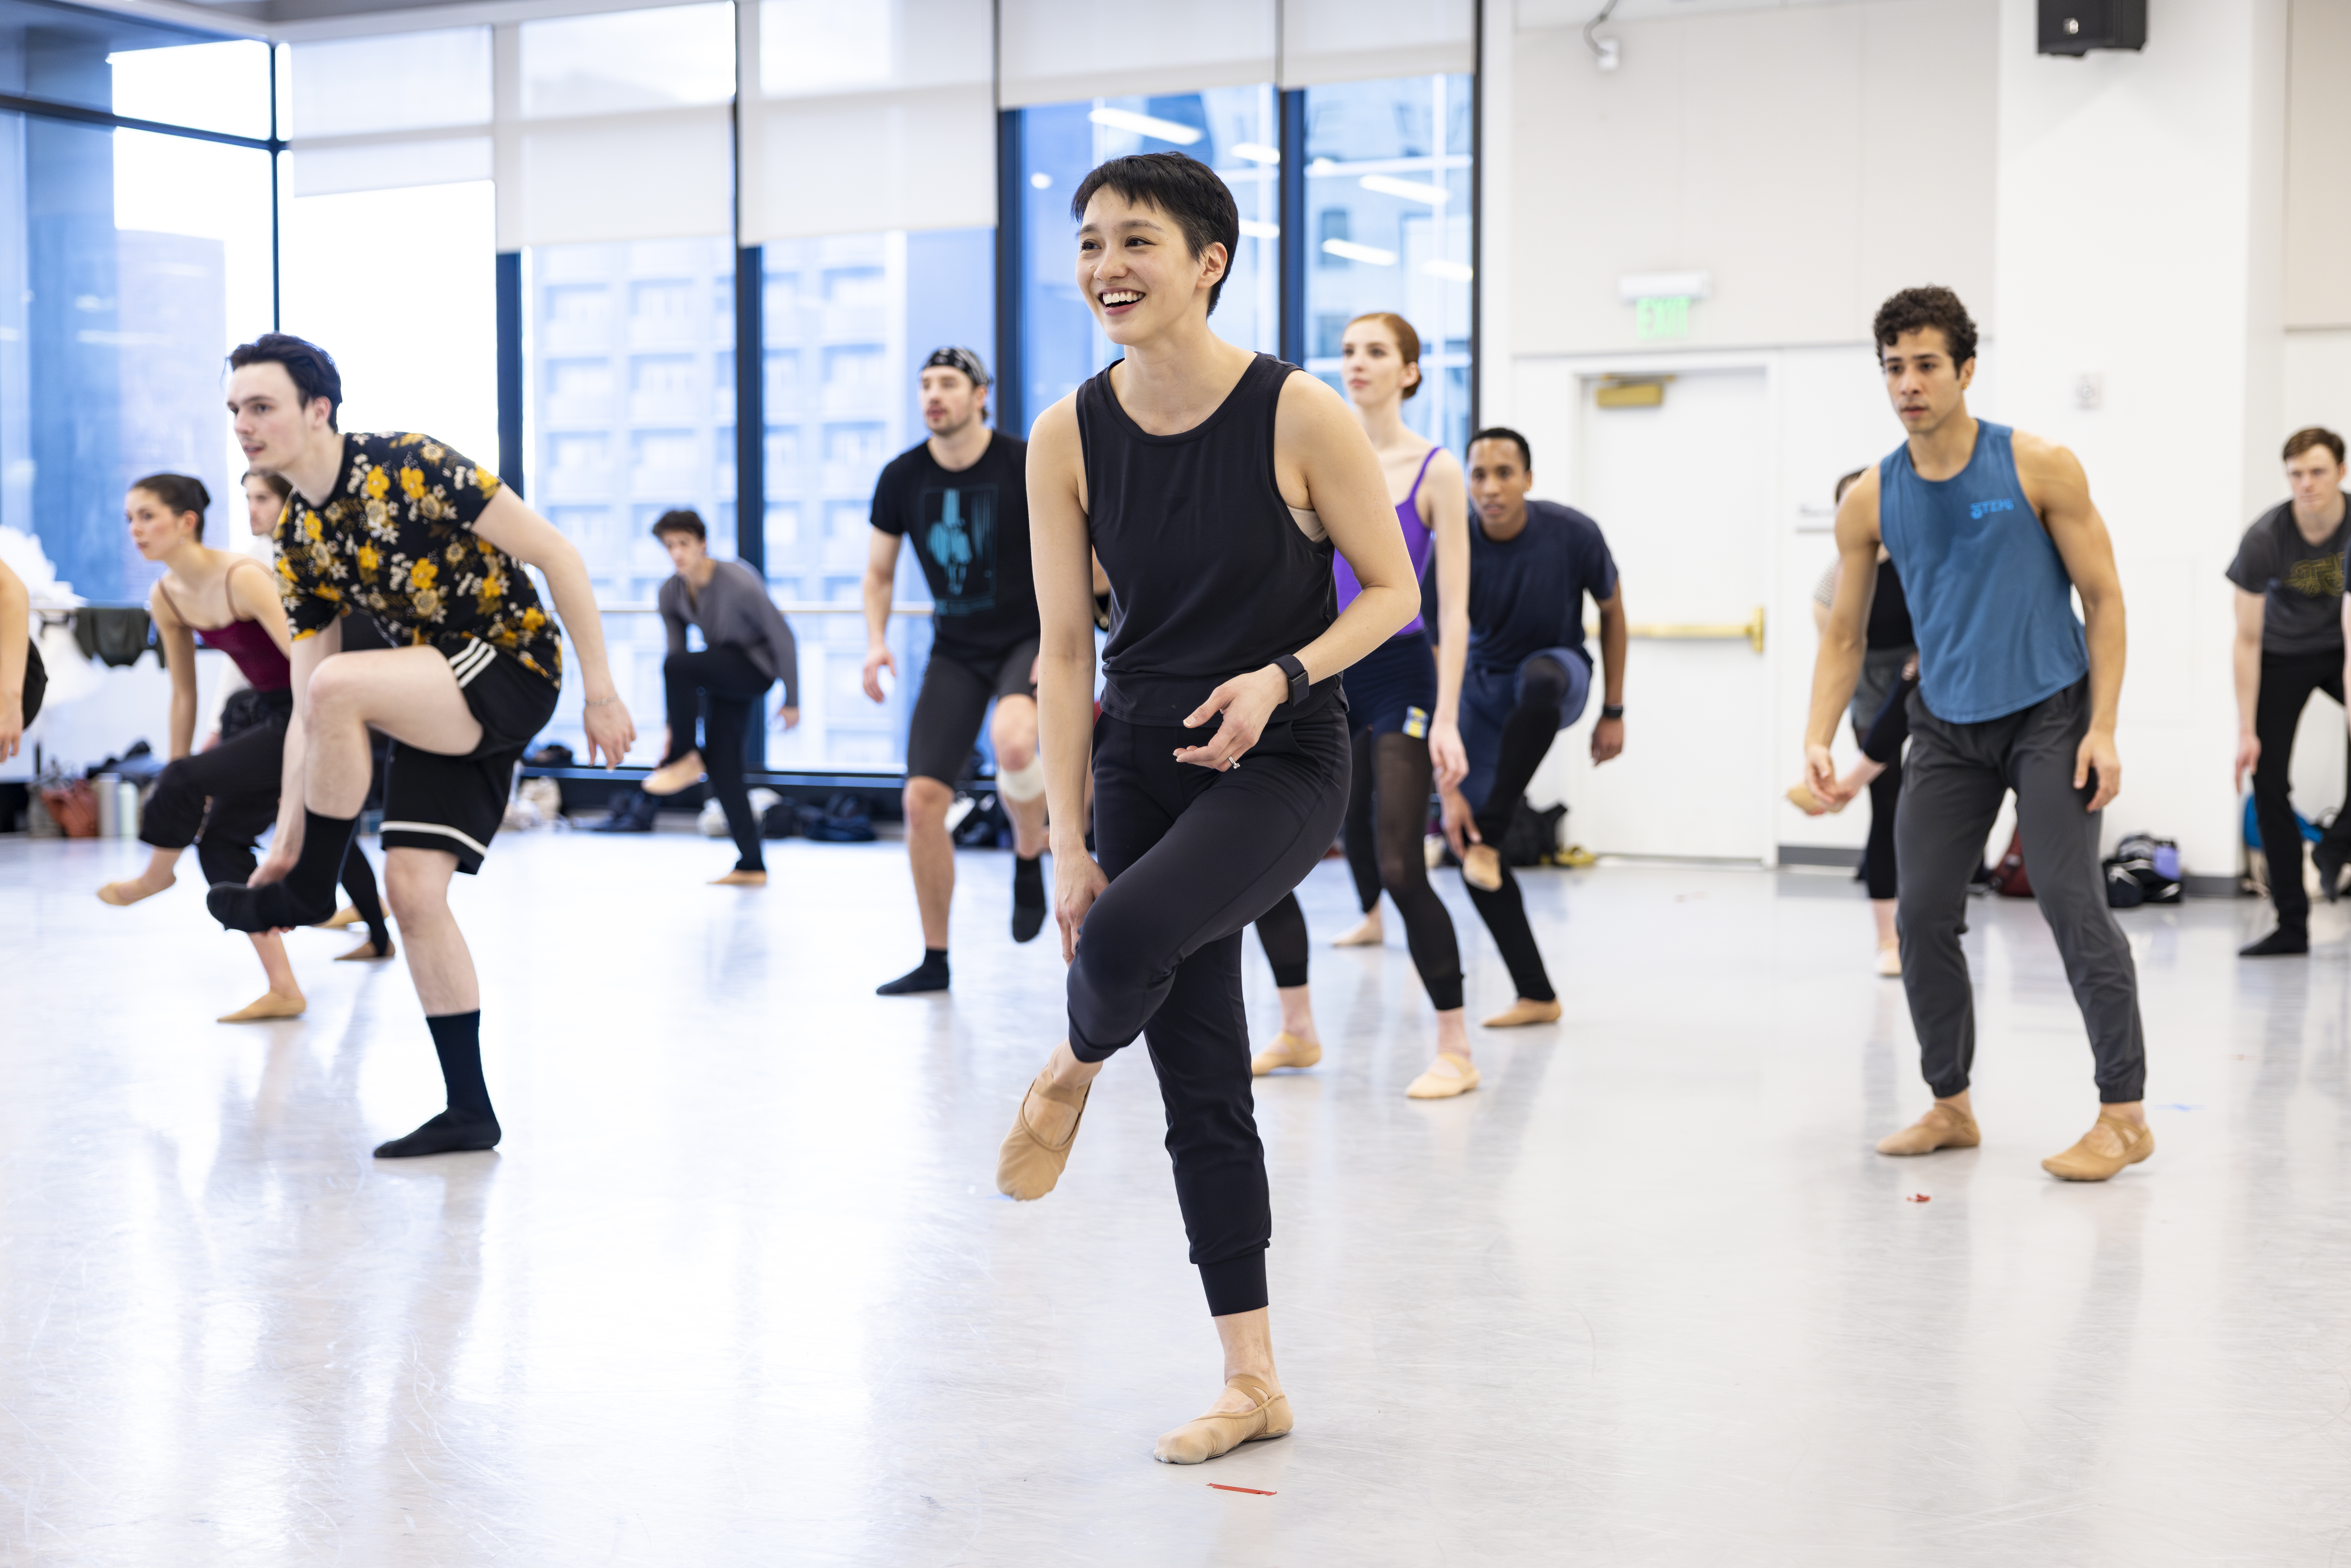 Caili Quan leads a rehearsal at Ballet West, the bright studio packed with dancers in various rehearsal attire.